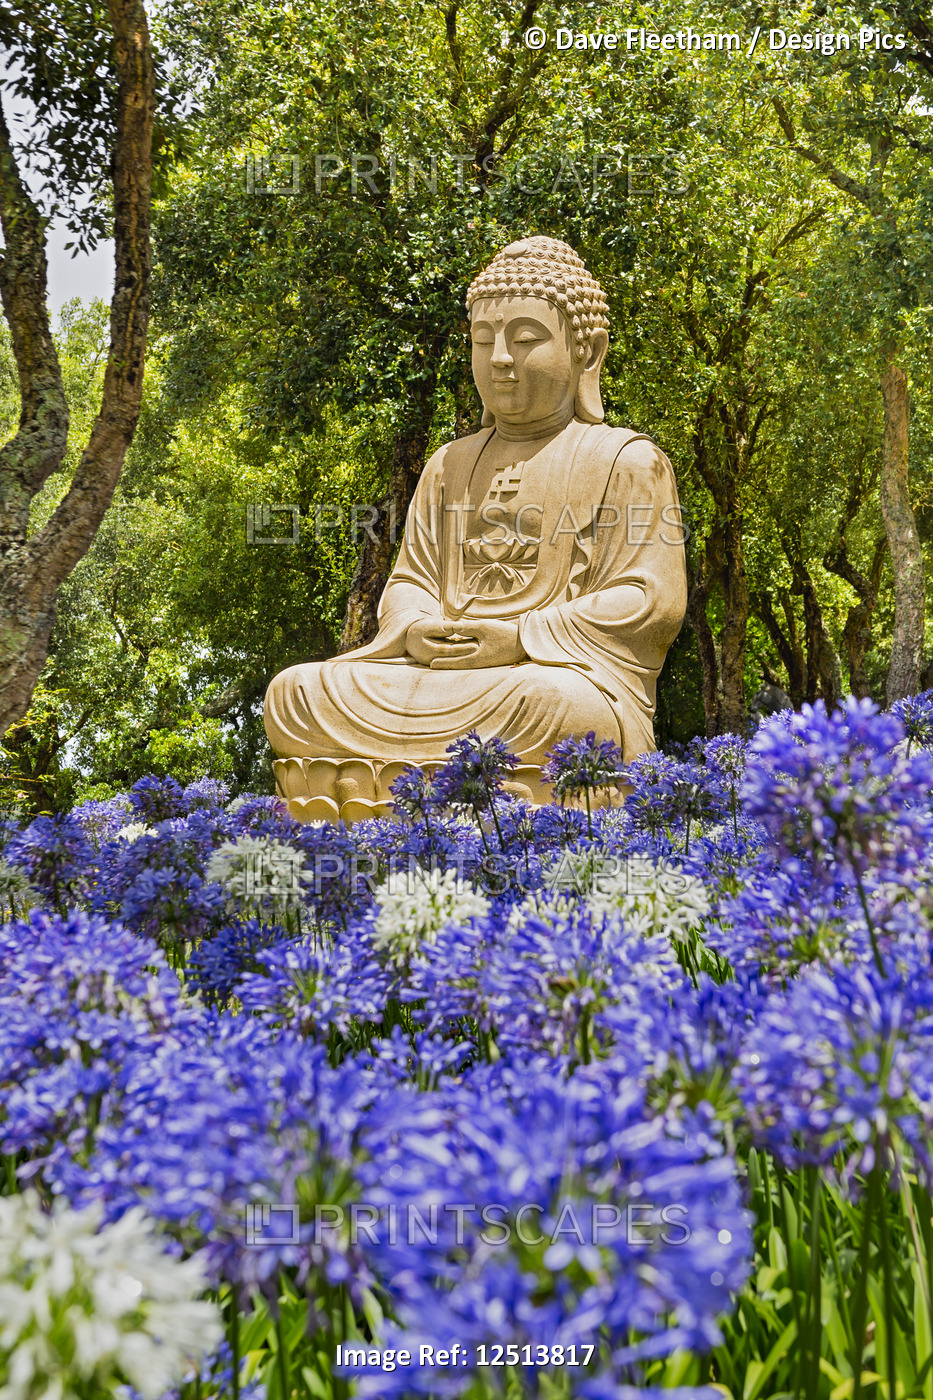 One of the many statues of Buddha in the Buddha Eden Garden, consisting of 35 ...